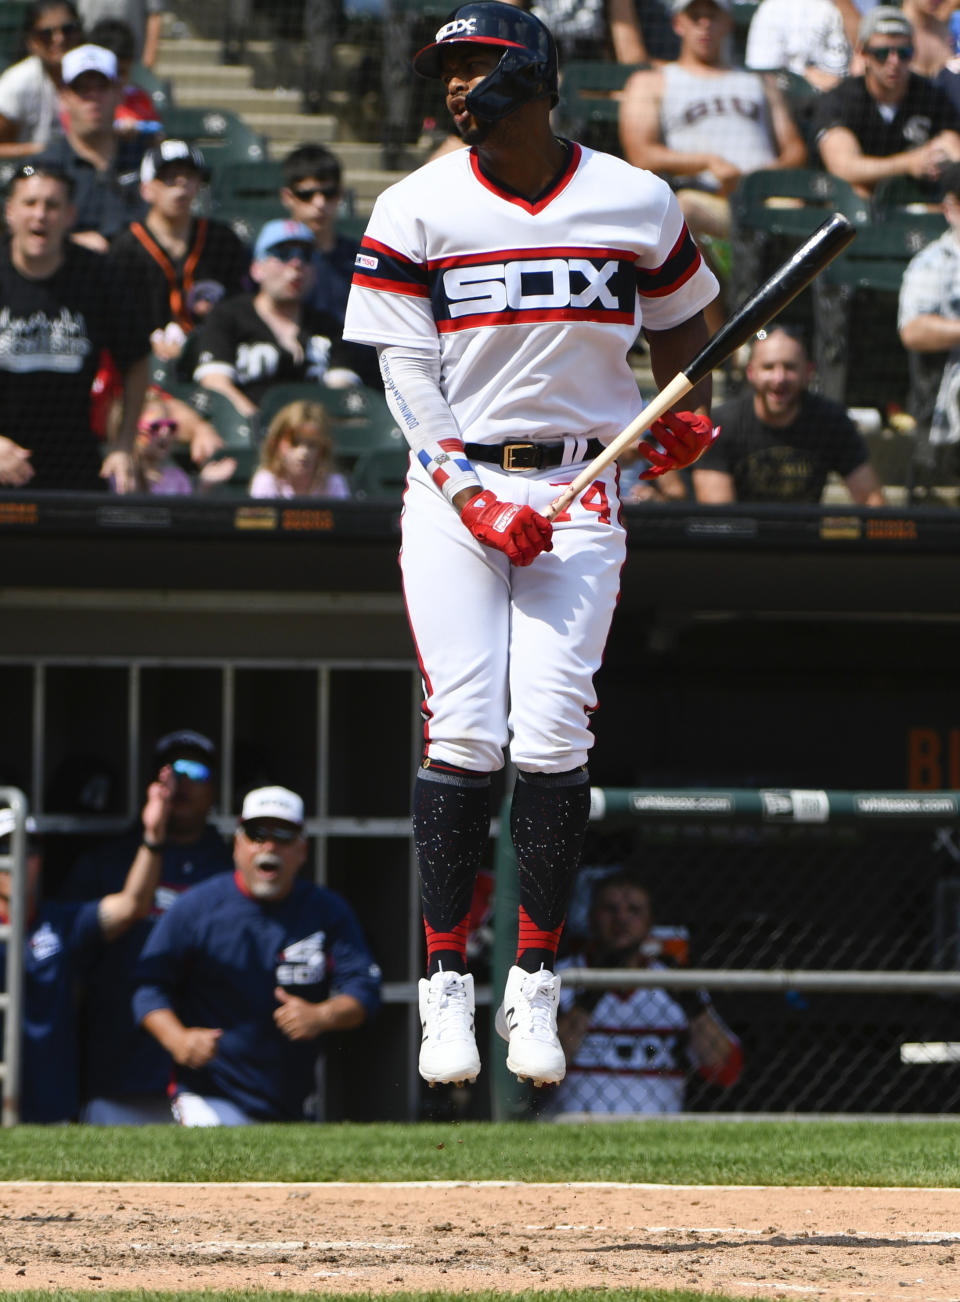 Chicago White Sox's Eloy Jimenez reacts after being called out on strikes during the sixth inning of a baseball game against the Minnesota Twins, Sunday, July 28, 2019, in Chicago. (AP Photo/Matt Marton)